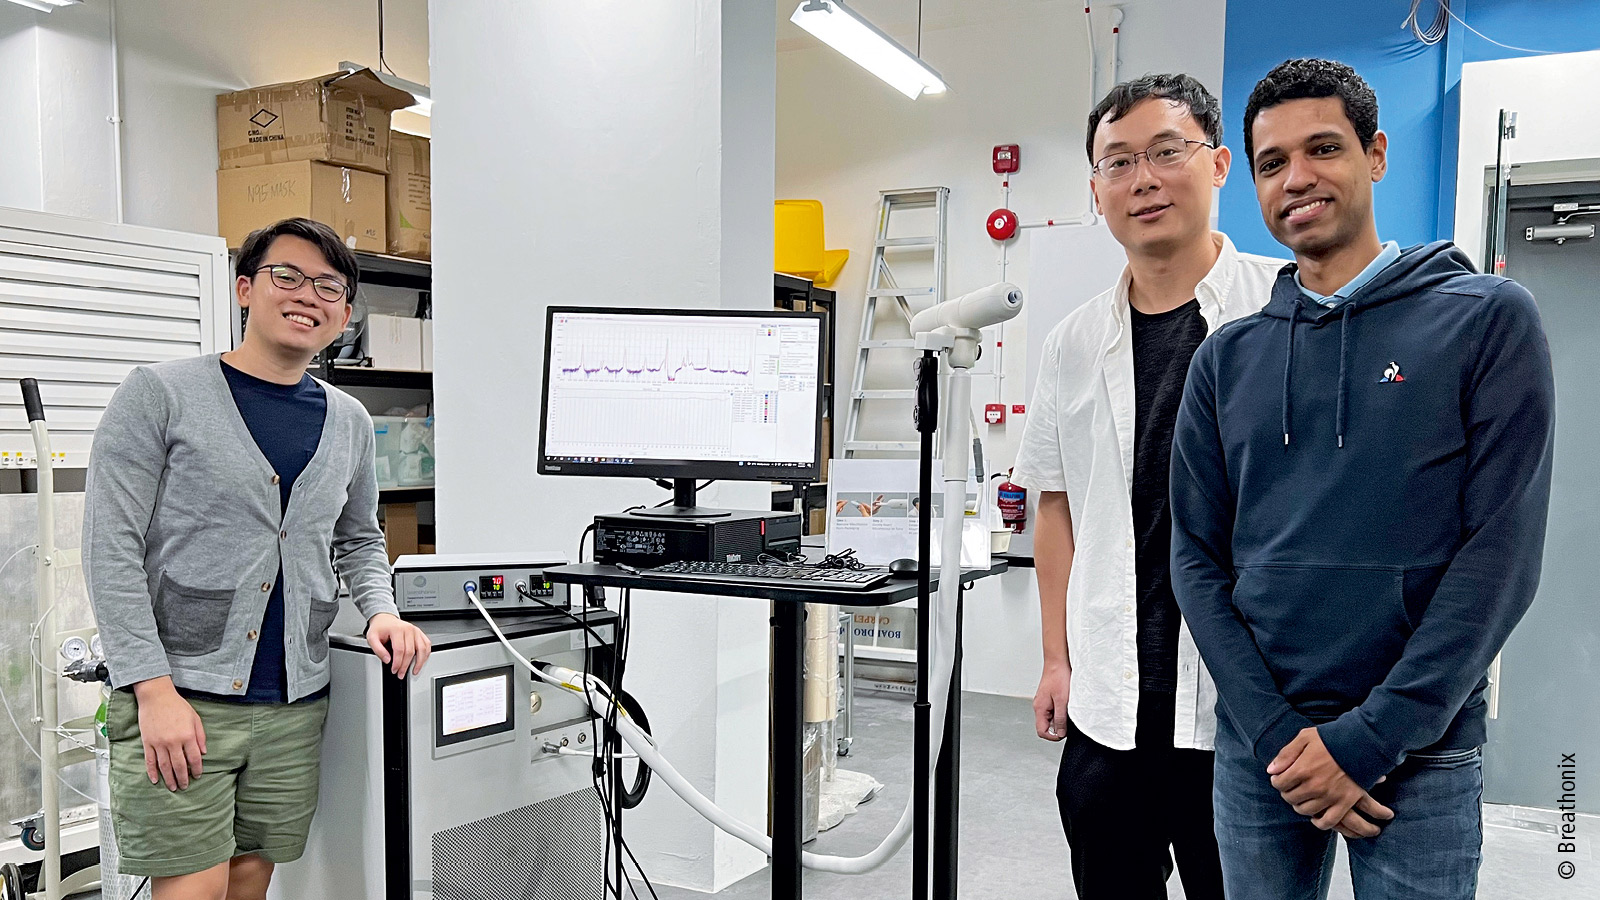 The Breathonix team with a PTR-TOF analyzer from Ionicon: The scientists from Singapore process the analysis data for the novel COVID-19 breath test using special software and can provide the result after just one minute. 